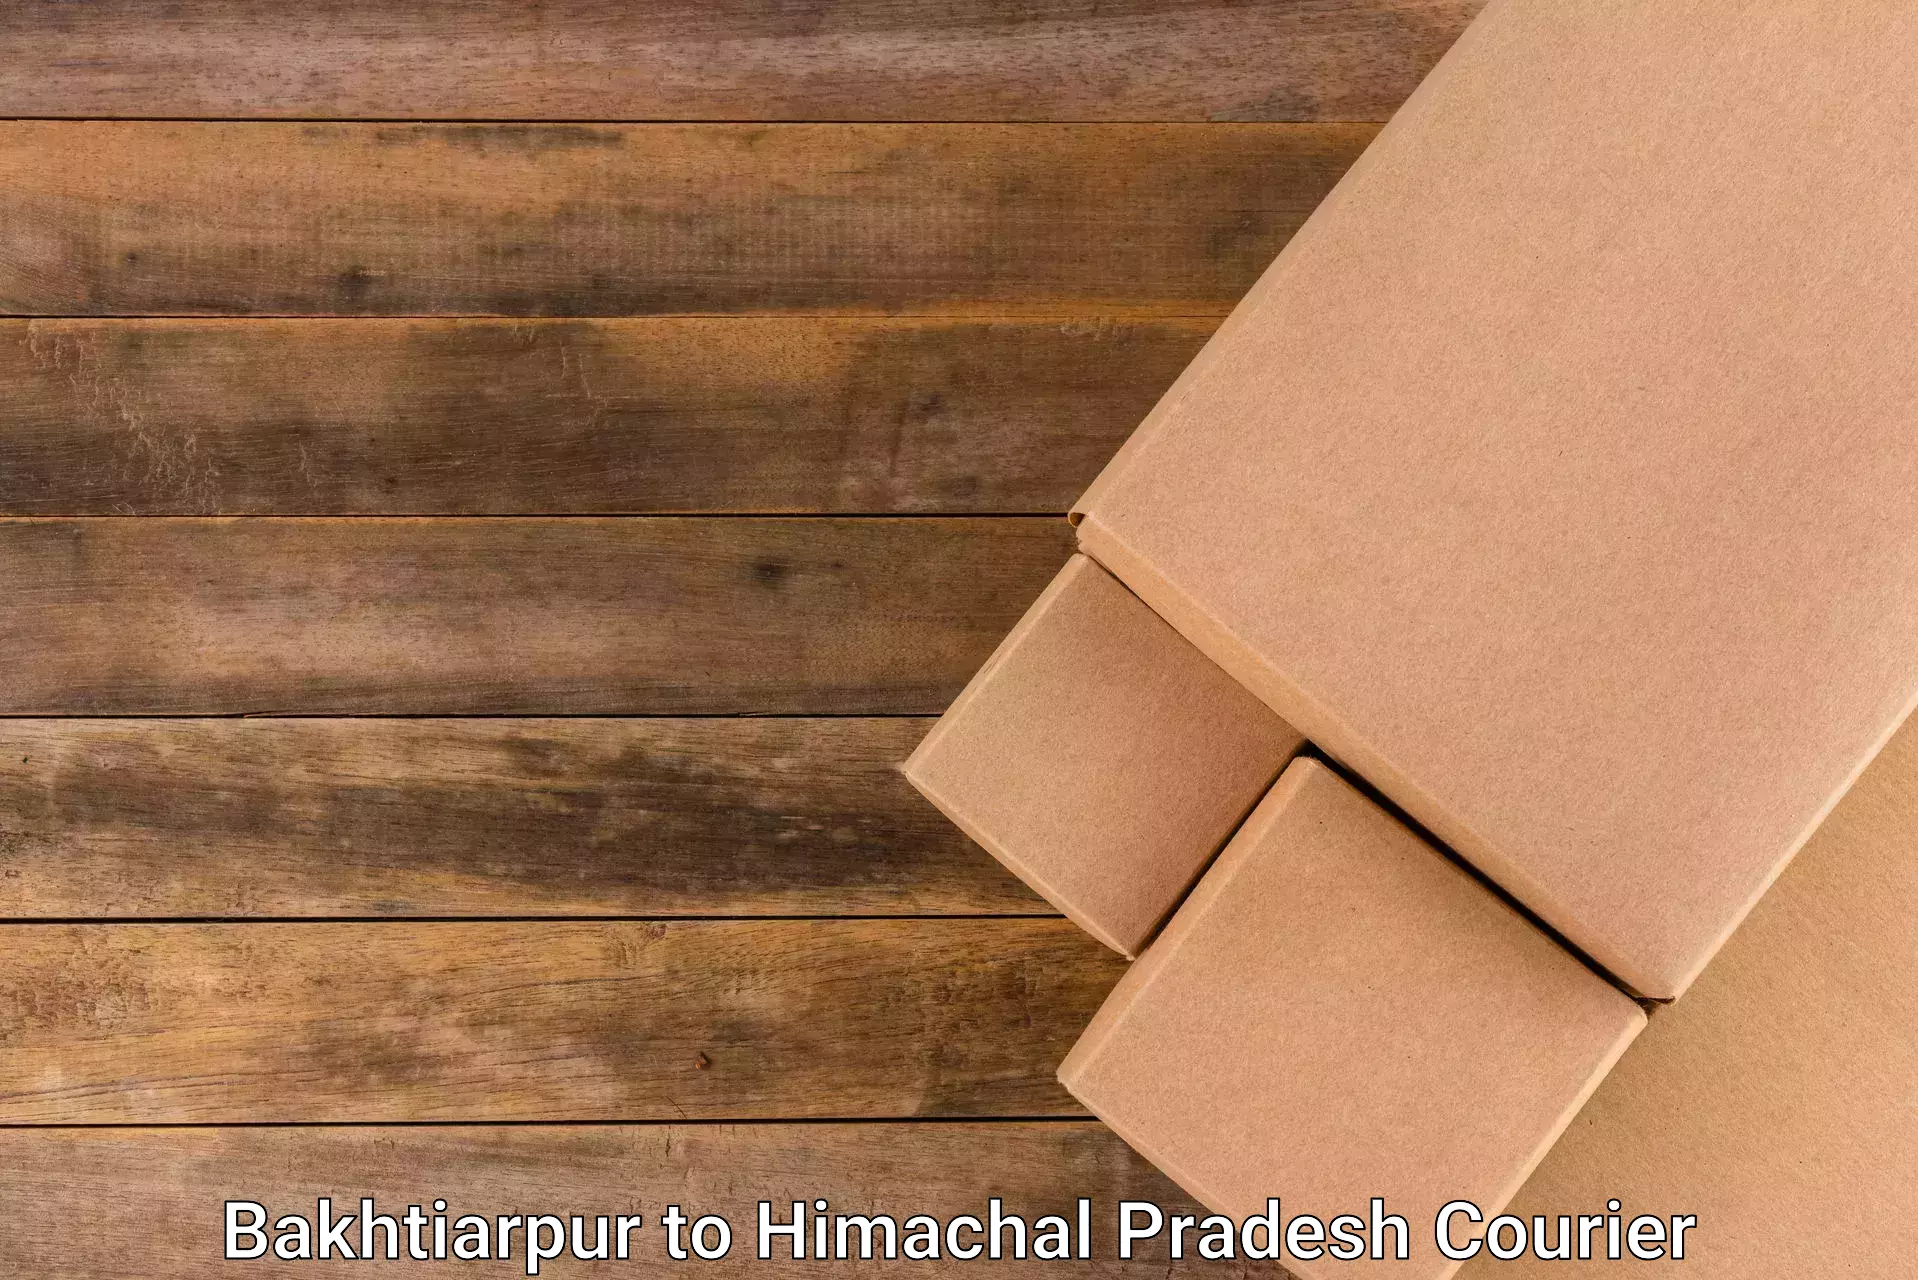 Express mail solutions in Bakhtiarpur to Himachal Pradesh